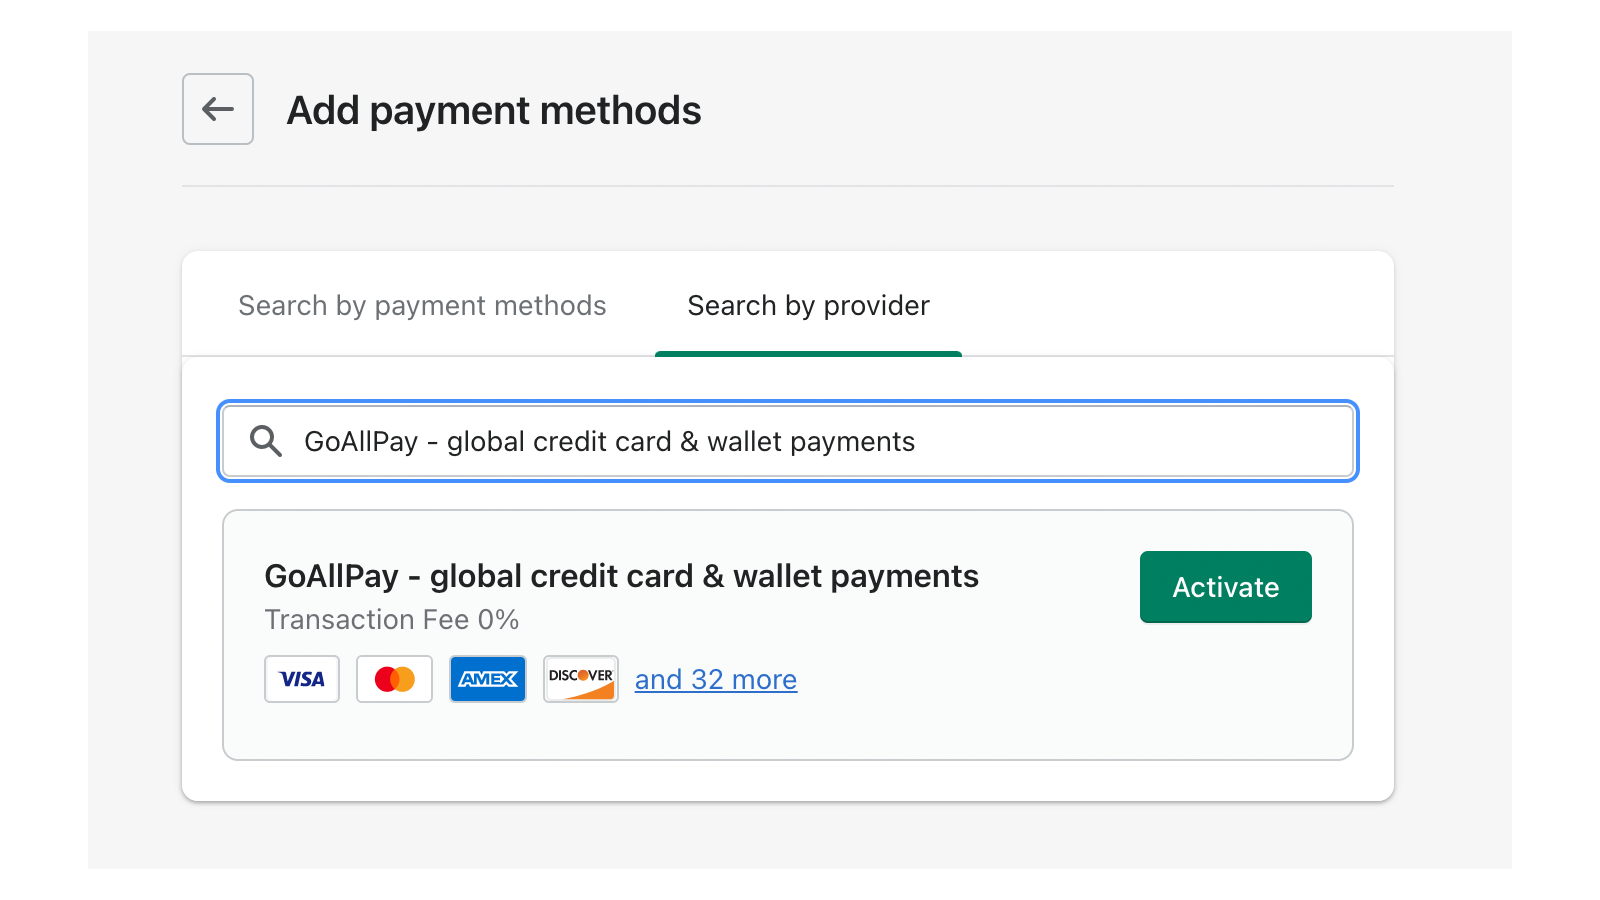 Merchant searches and selects GoAllPay app